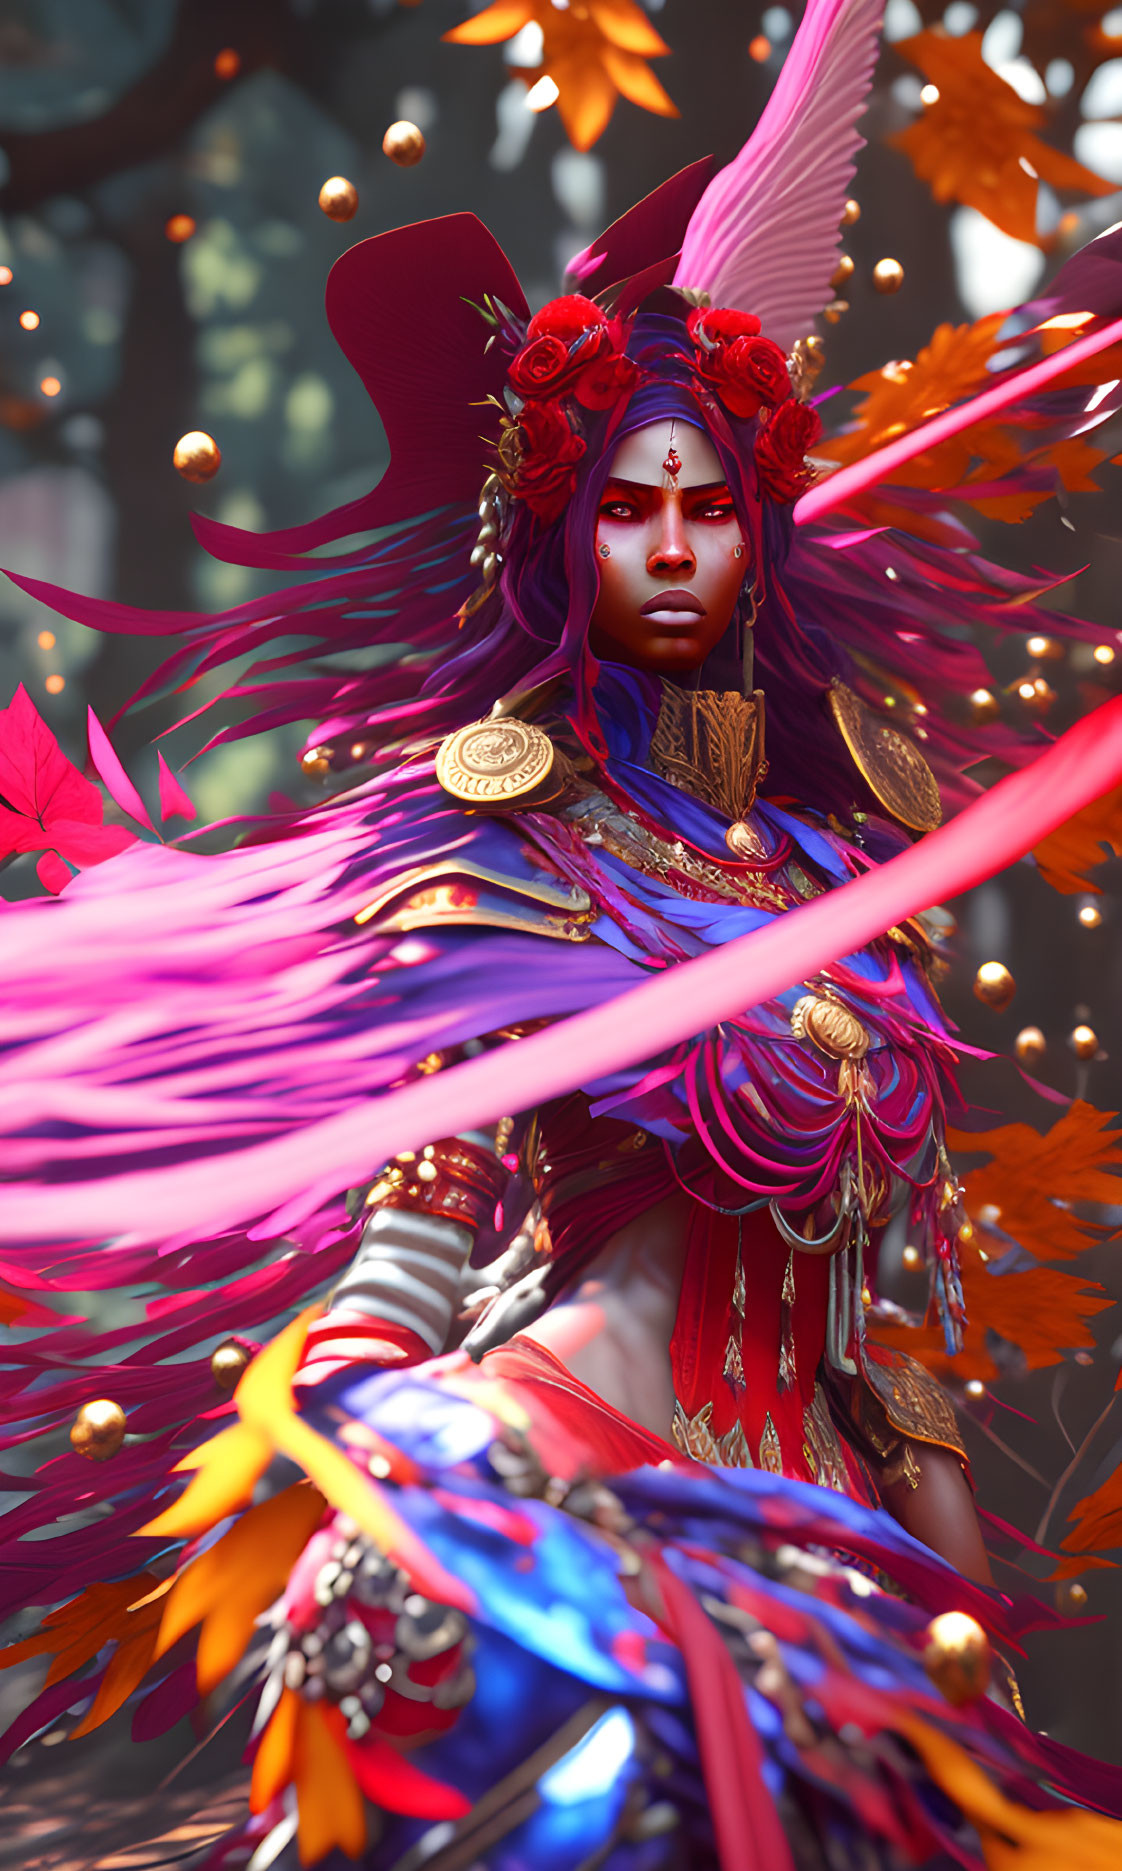 Purple-skinned fantasy figure in red and gold costume among autumn leaves